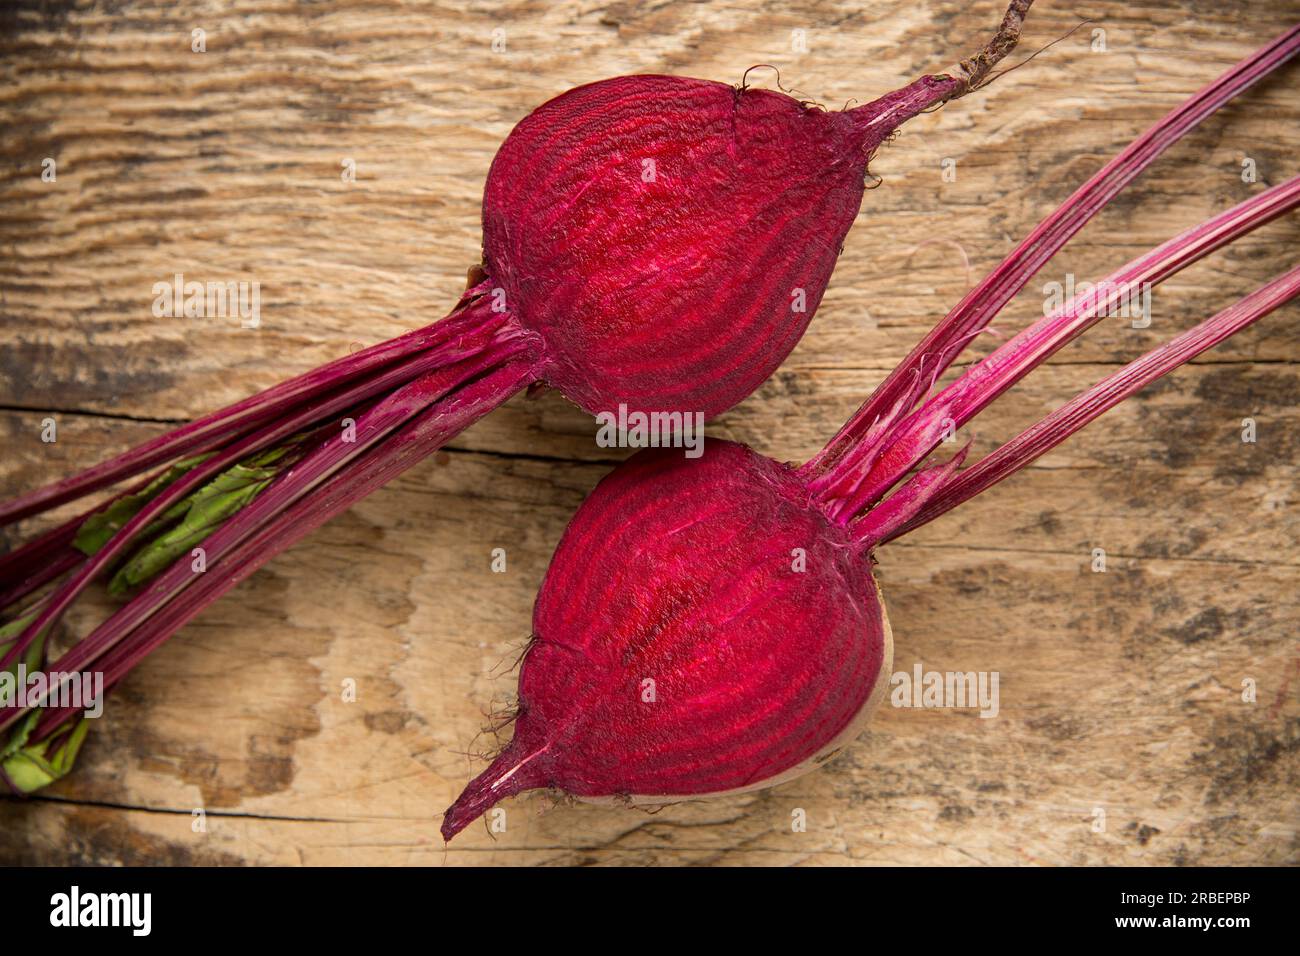 Sliced raw beetroot from a supermarket in the UK that will be used to make Borscht soup. England UK GB Stock Photo